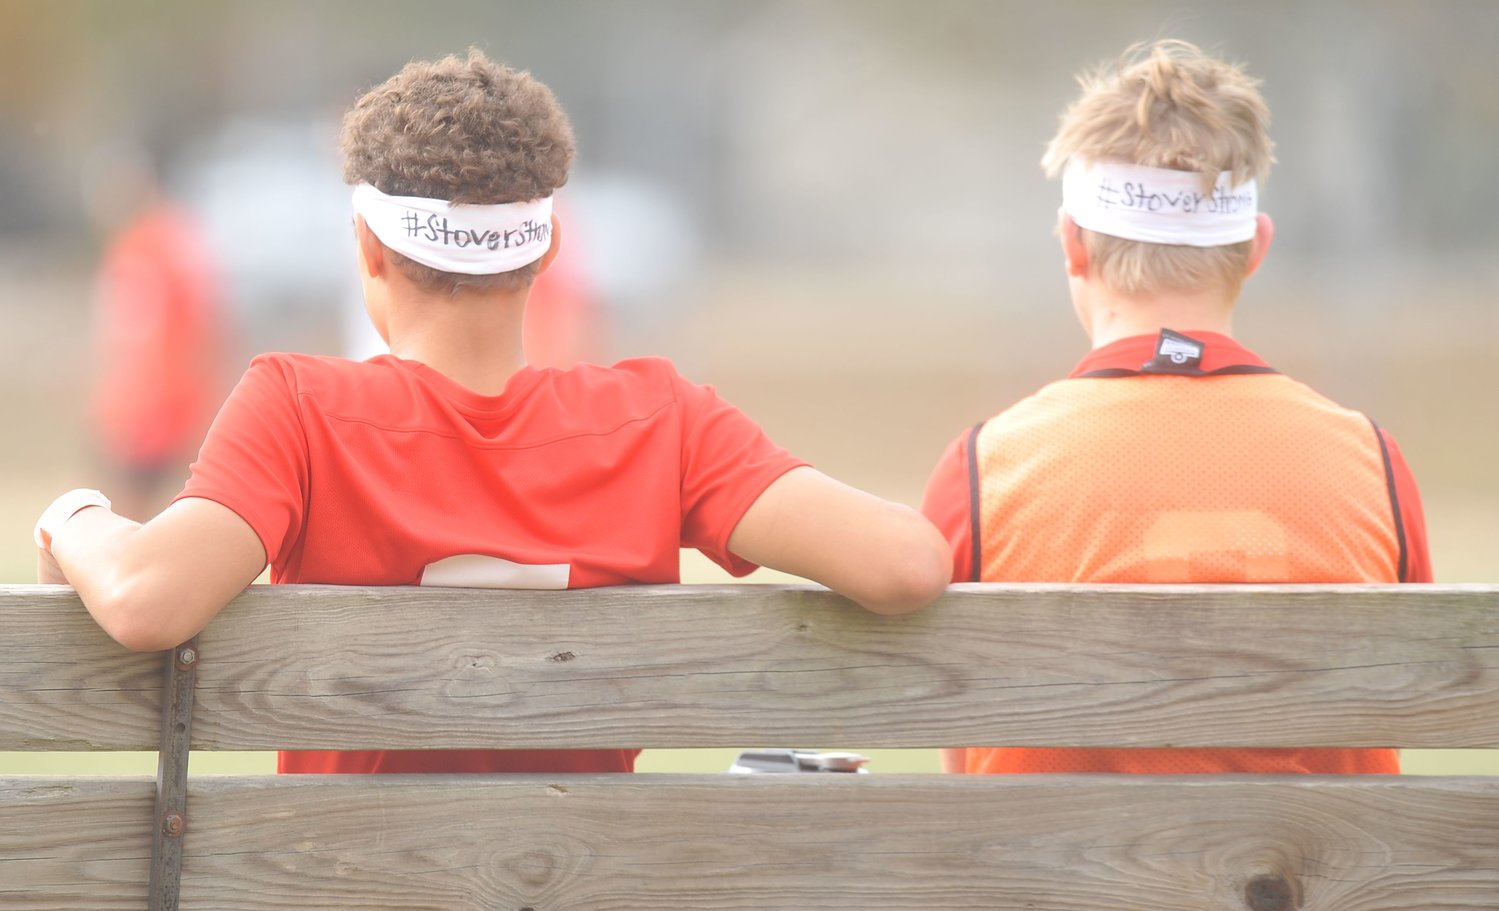 Laquey players wear “#StoverStrong” headbands on the bench during the Hornets’ match with the Bulldogs in Saturday’s Stover Classic semifinal.